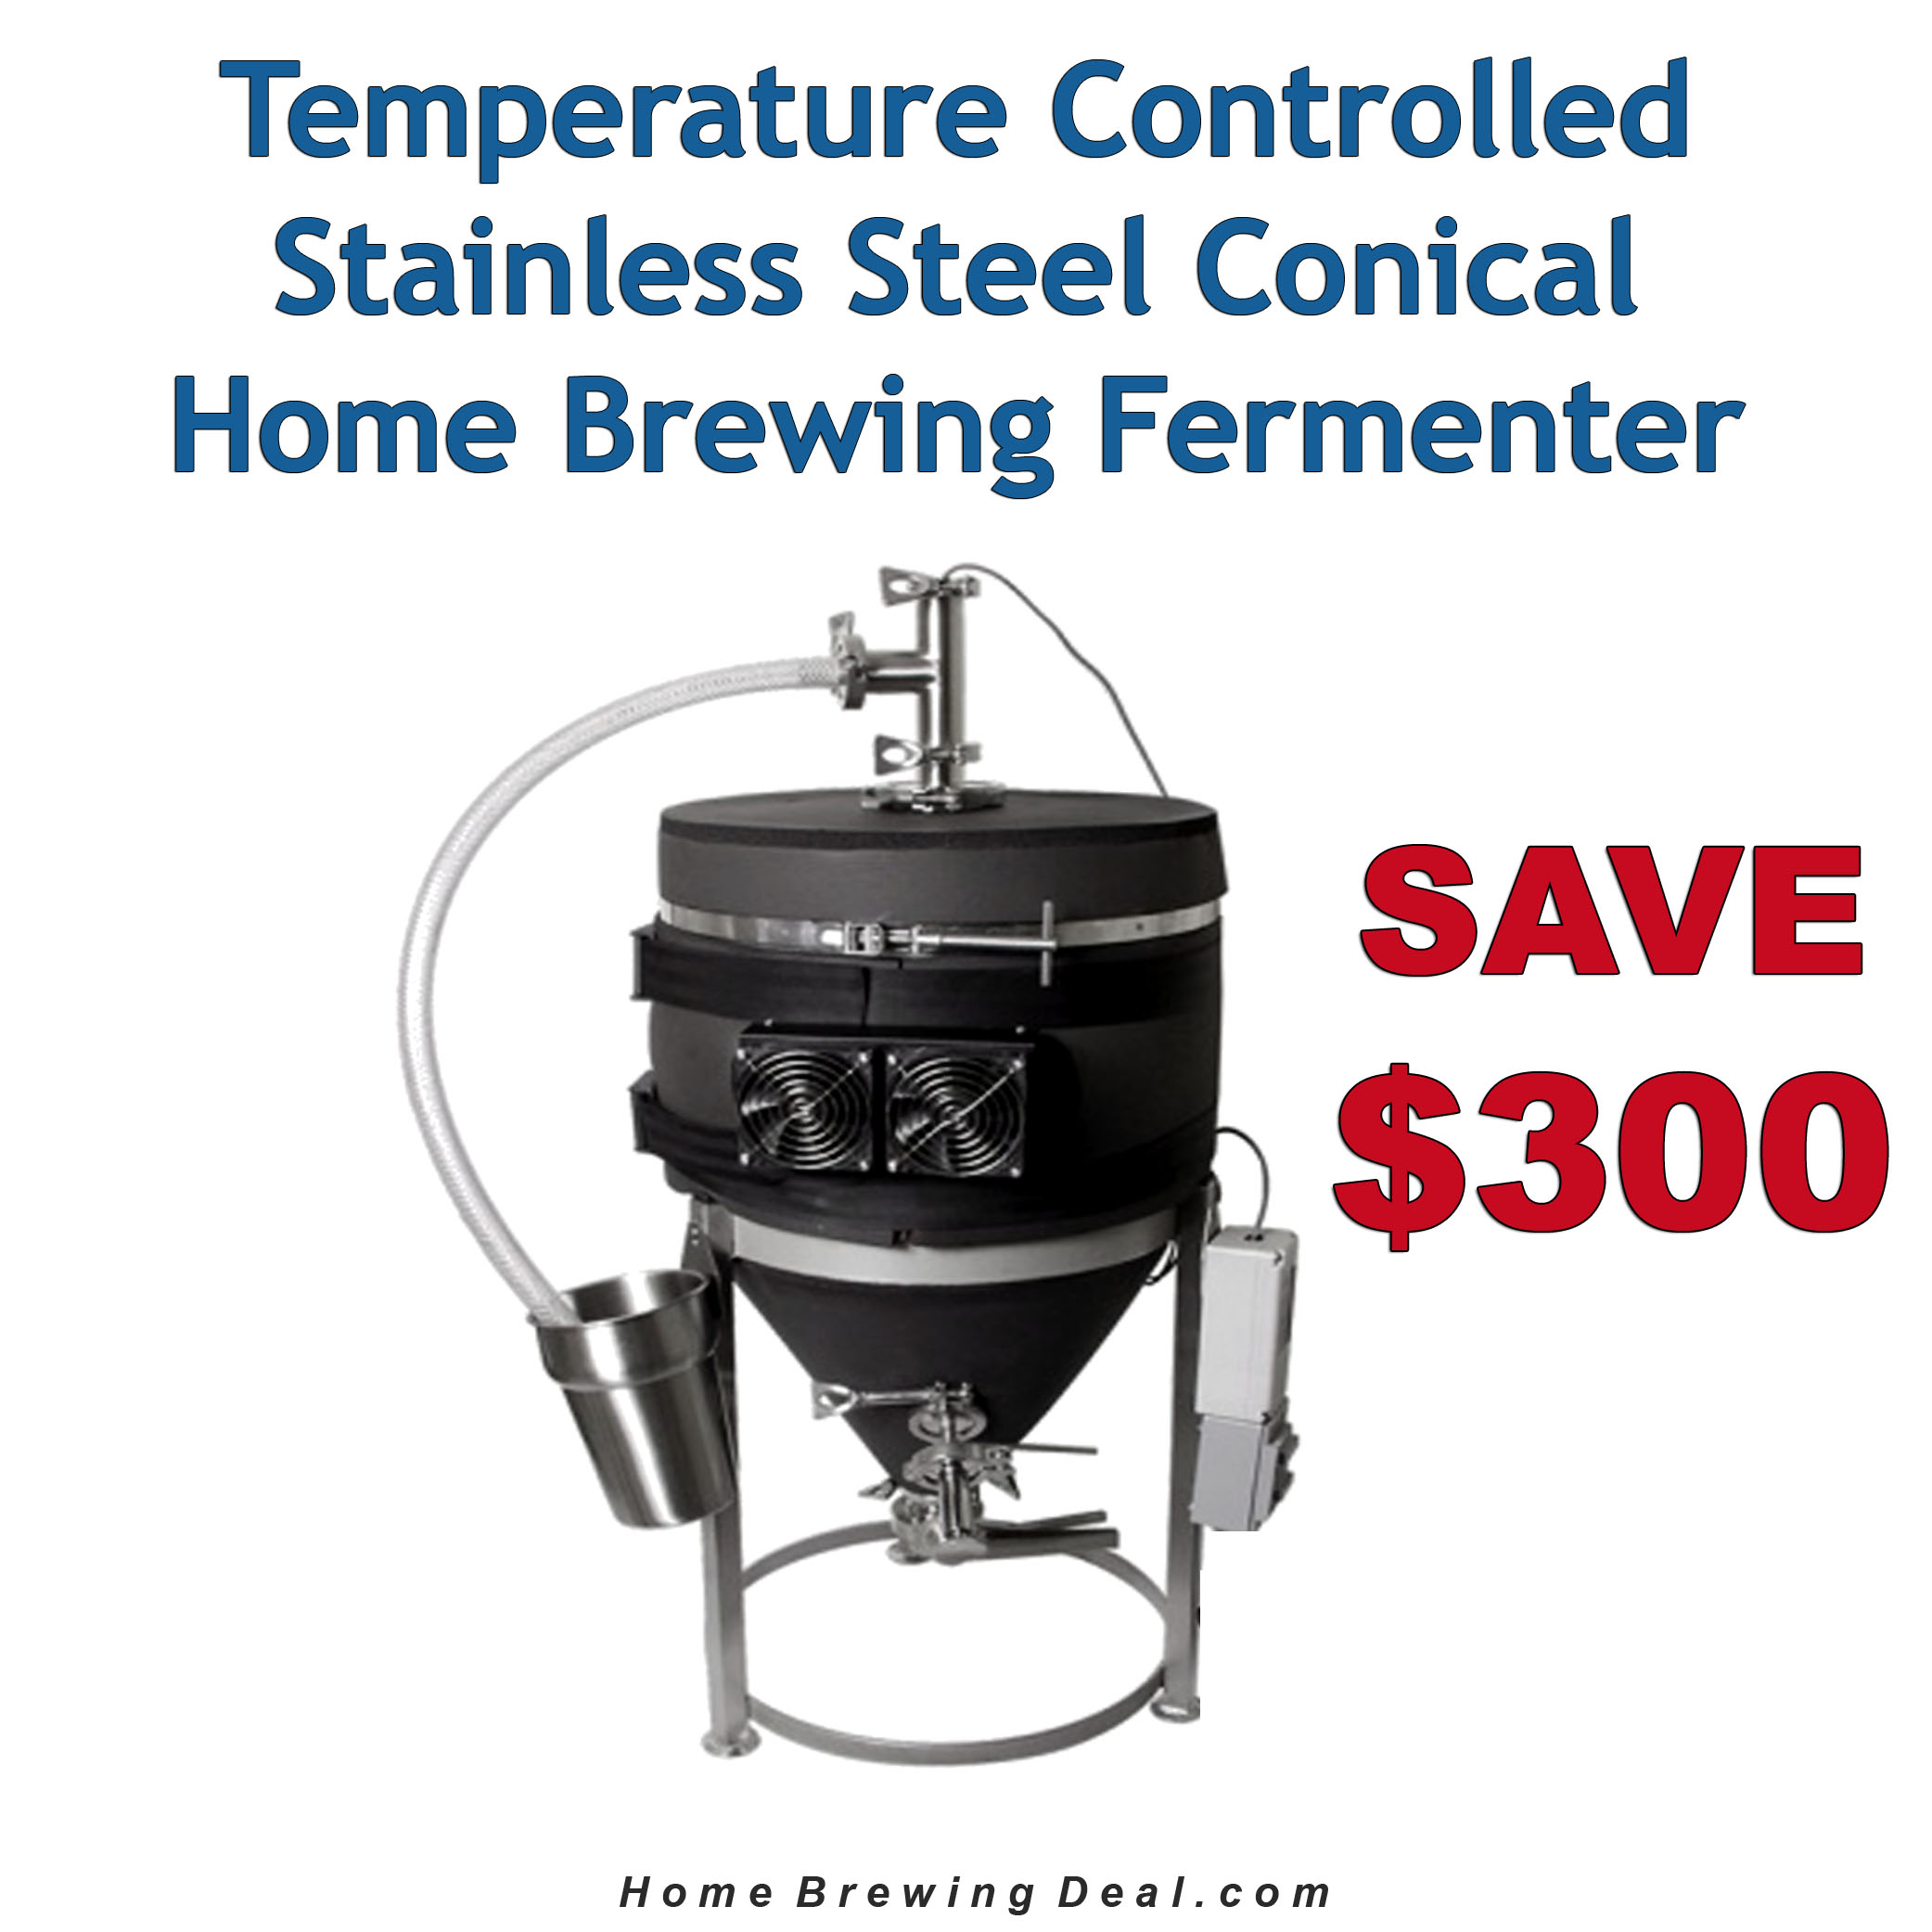  Home Brewer Promo Code for Save $300 On A Temperature Controlled Stainless Steel Fermenter Coupon Code